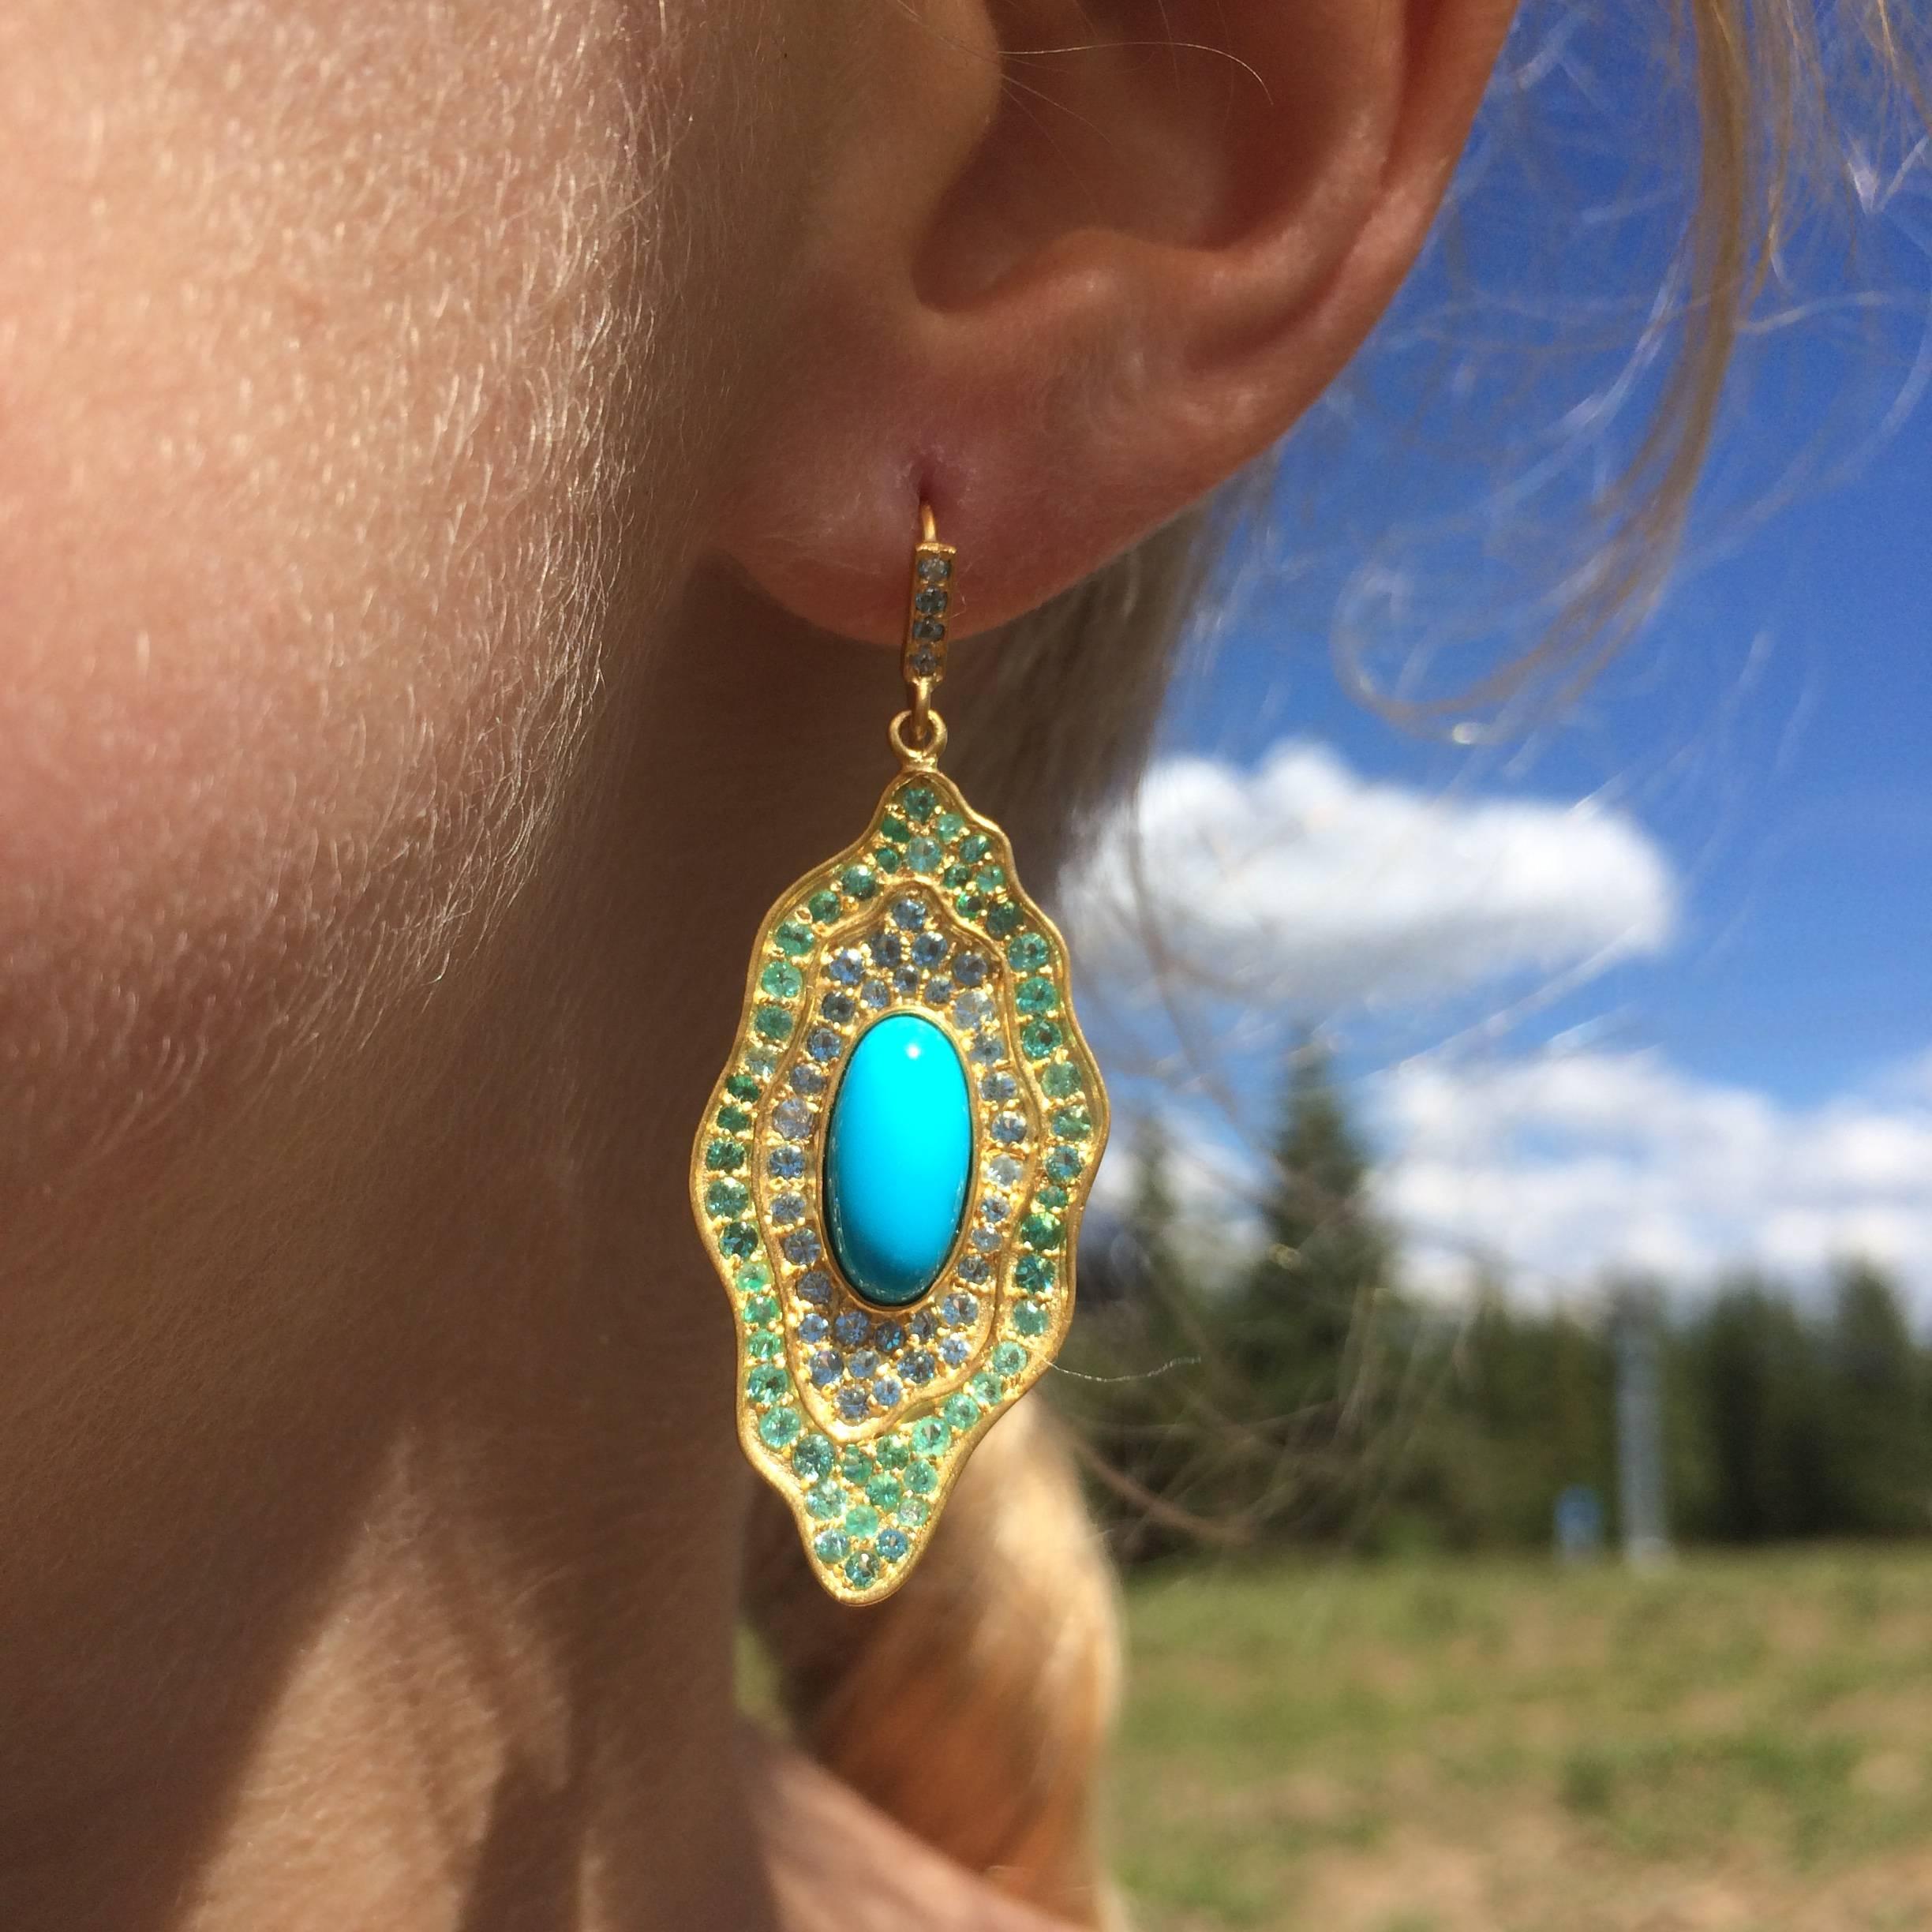 These gorgeous earrings will frame your face with bright and happy color, and ensure lots of compliments!  Organic in design, the outer section is faceted green emeralds, the middle band is beautiful aquamarine, and the center is clean and striking